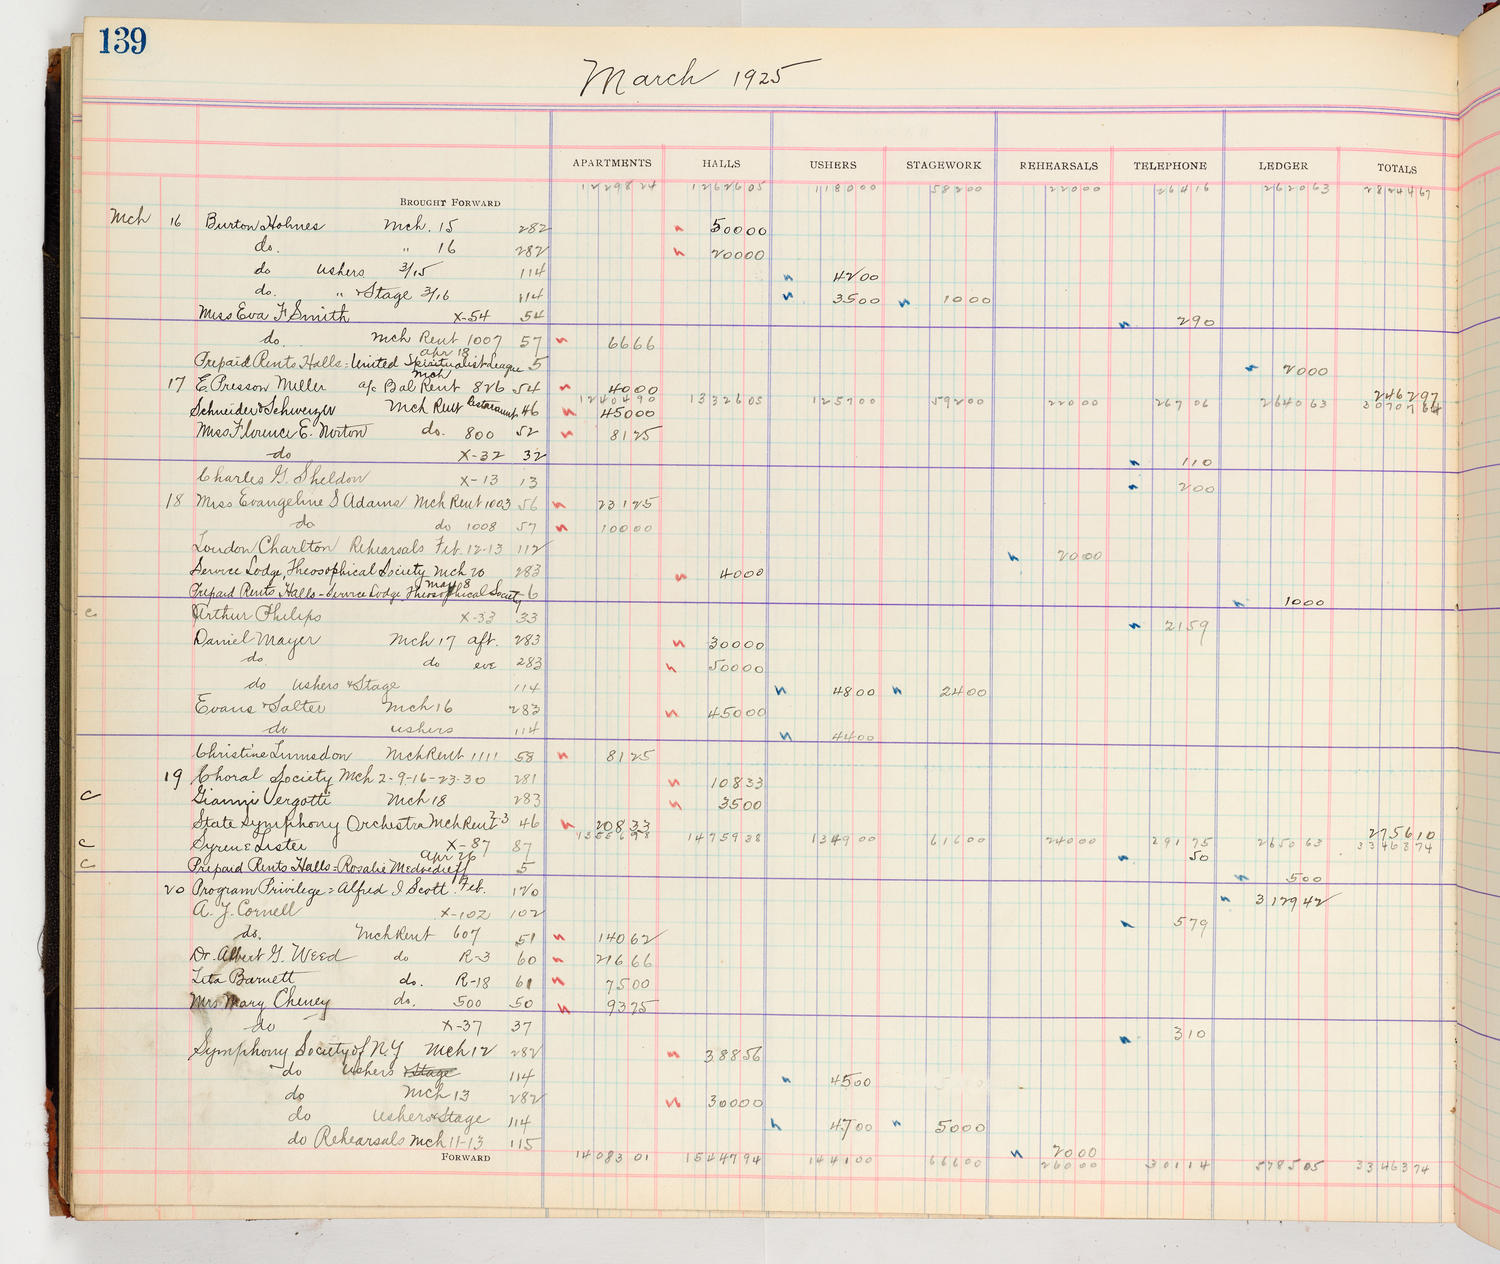 Music Hall Accounting Ledger Cash Book, volume 8, page 139a